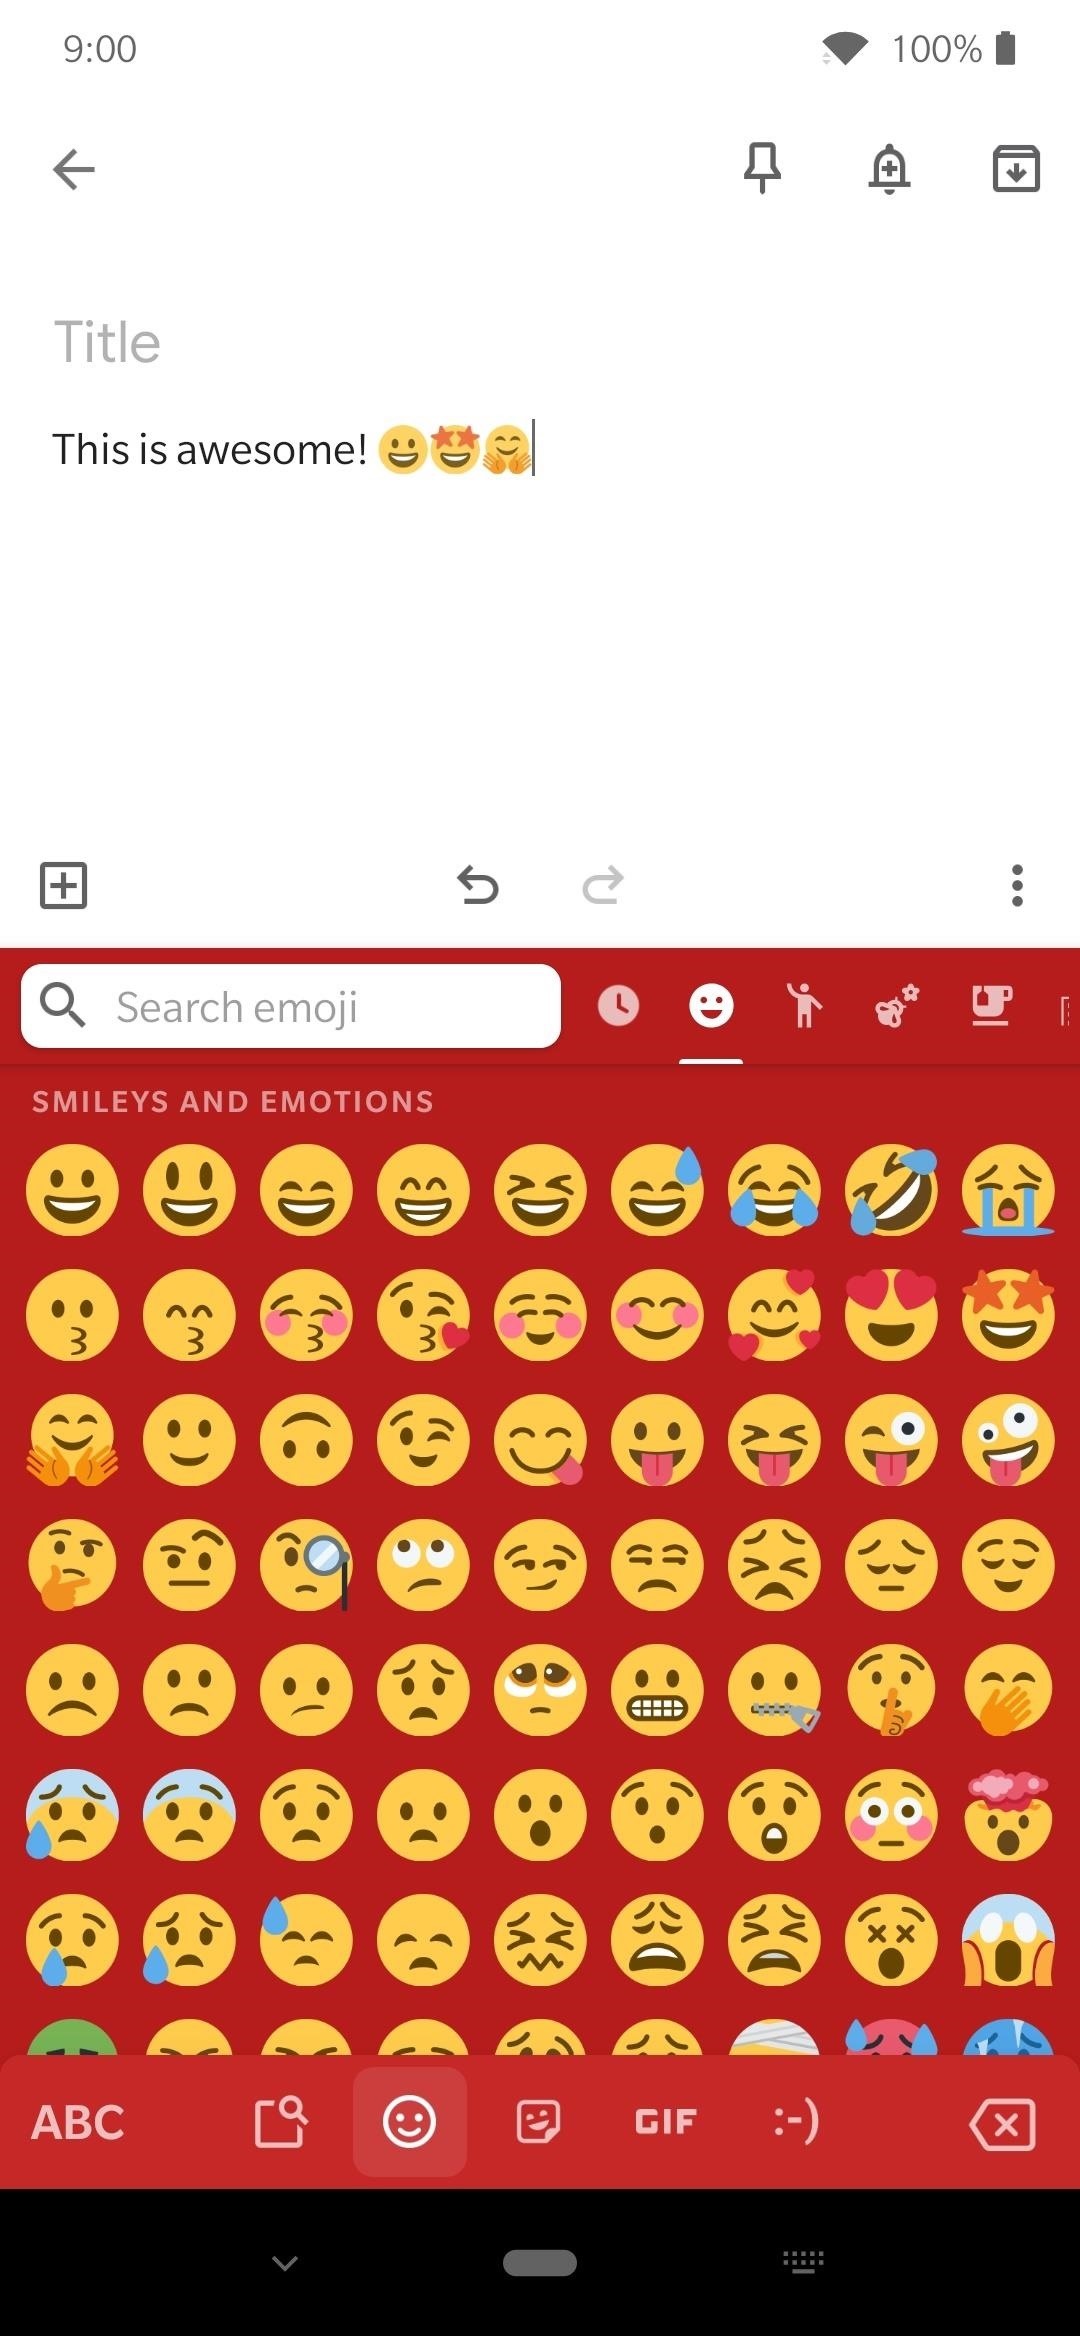 How to Get Twitter's Emojis on Any Android Phone